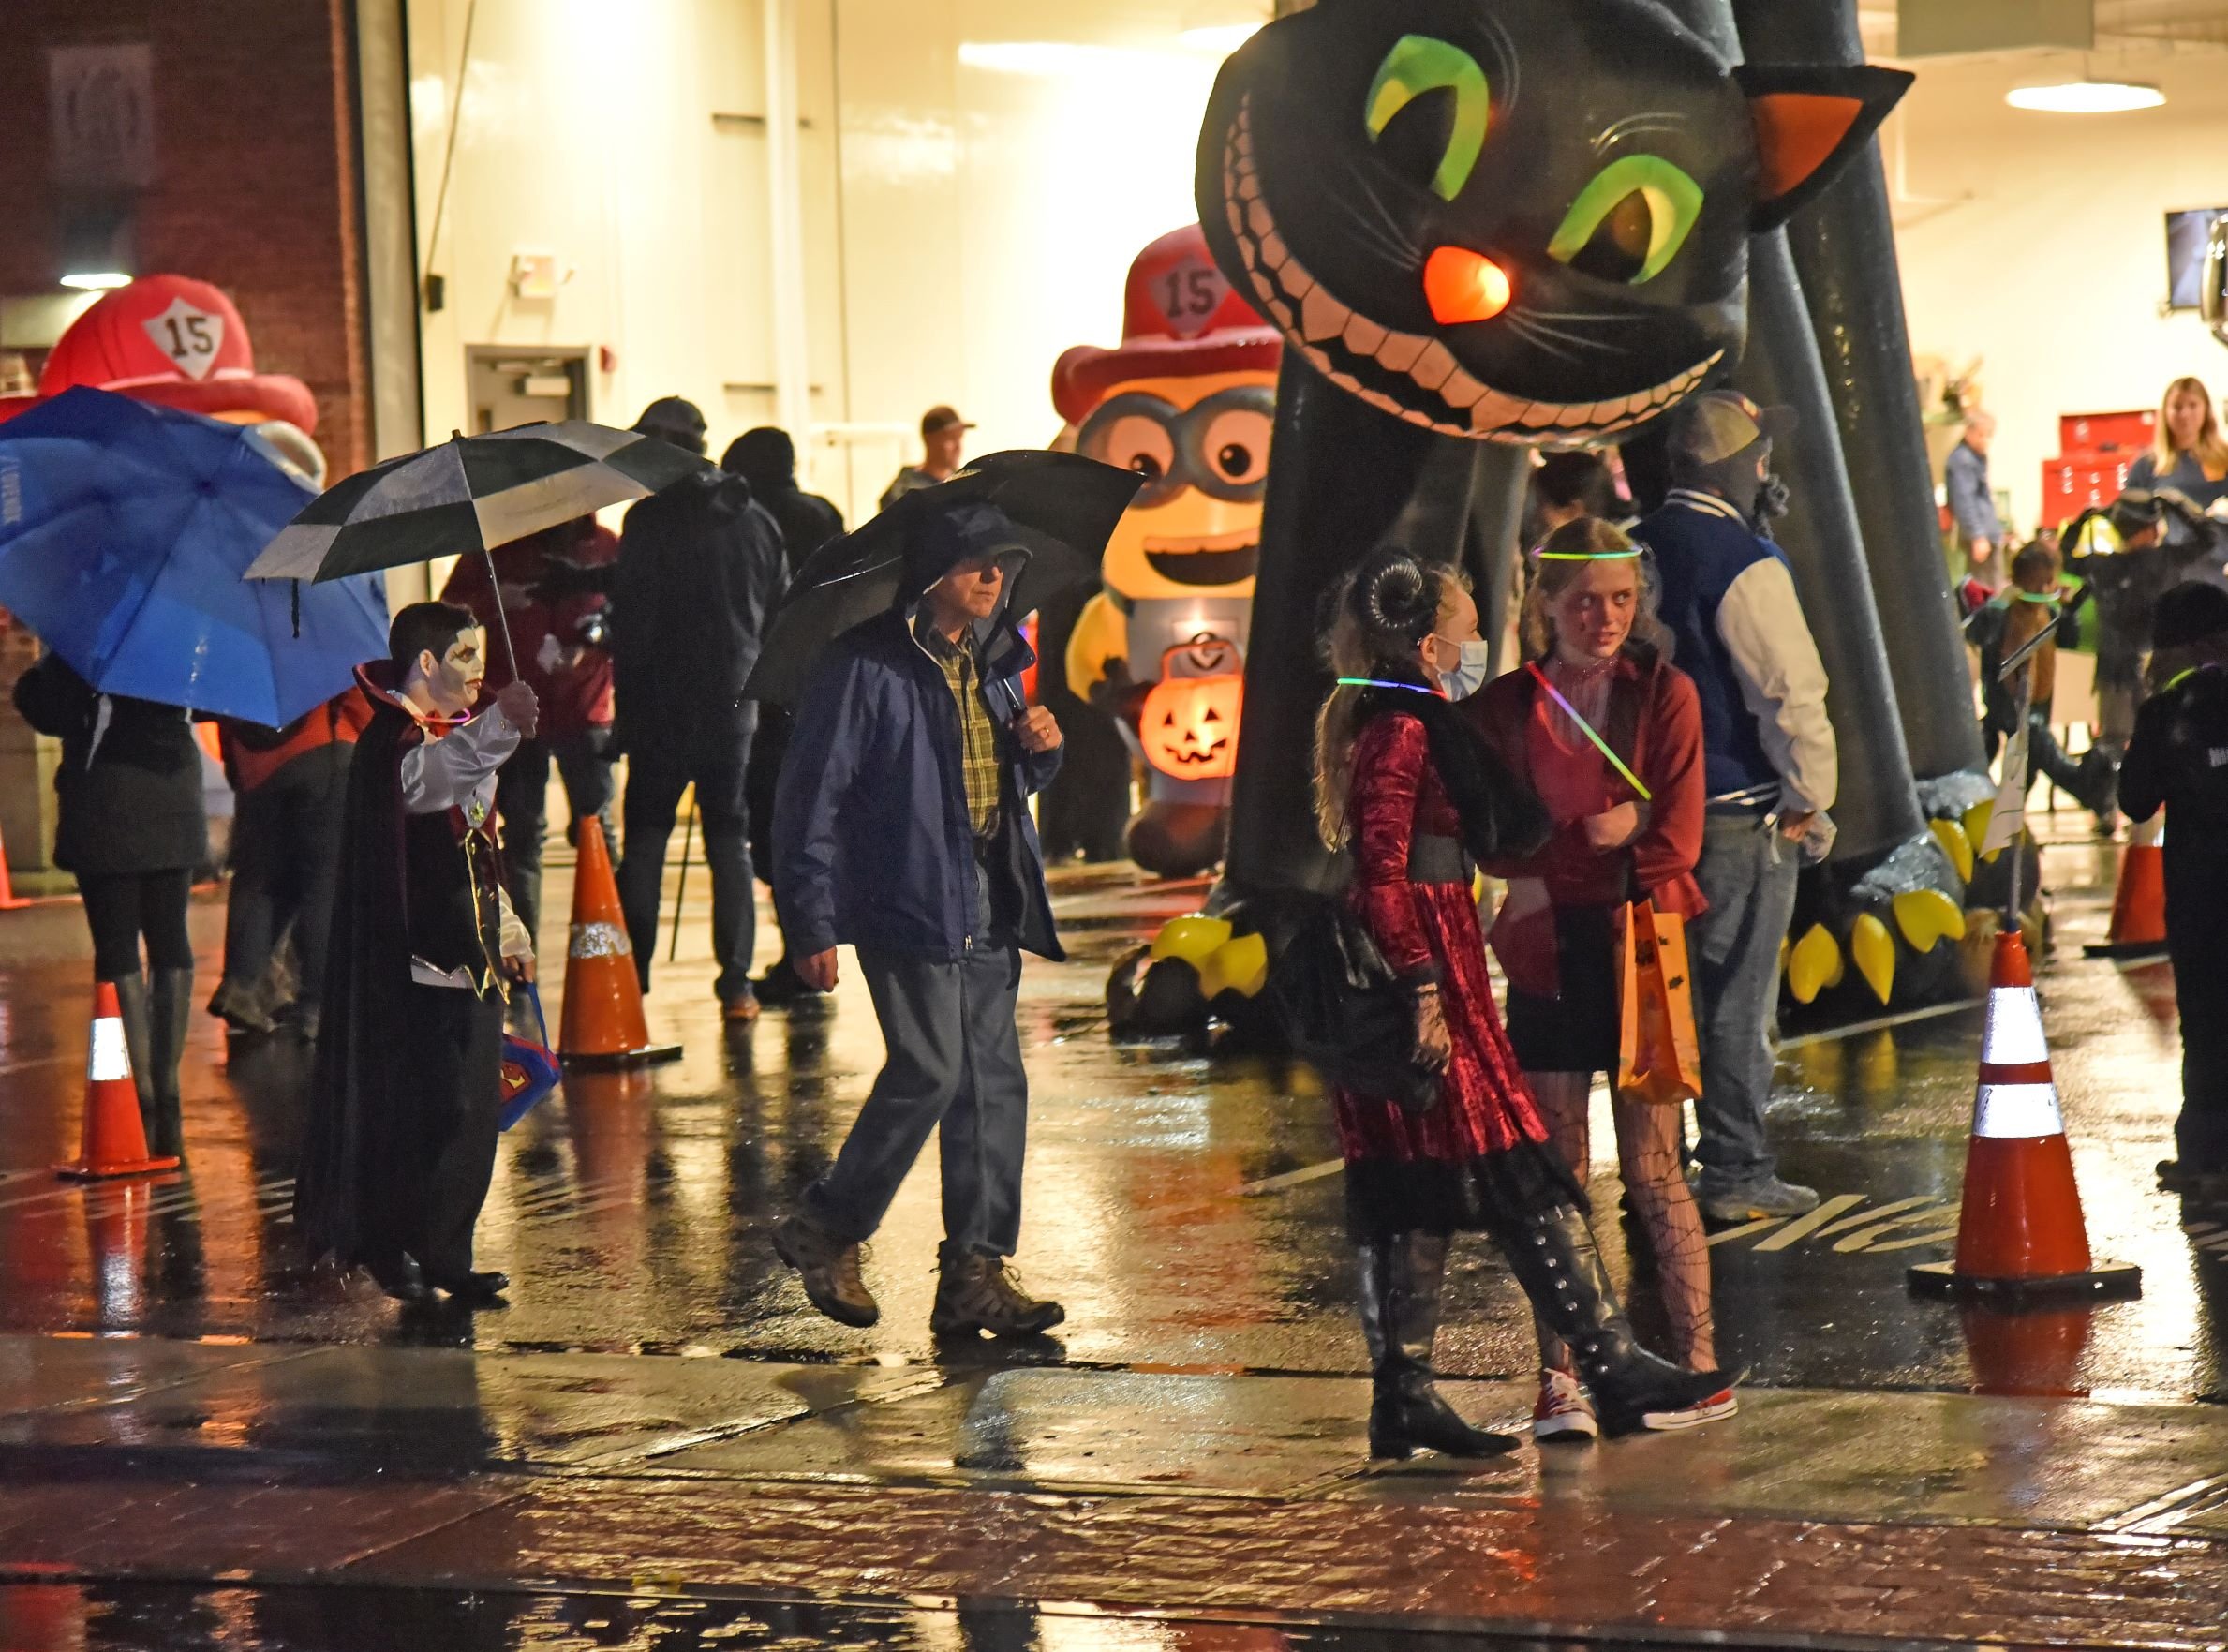  The Main Street fire station bustled with trick-or-treaters. Photo by Gordon Miller 